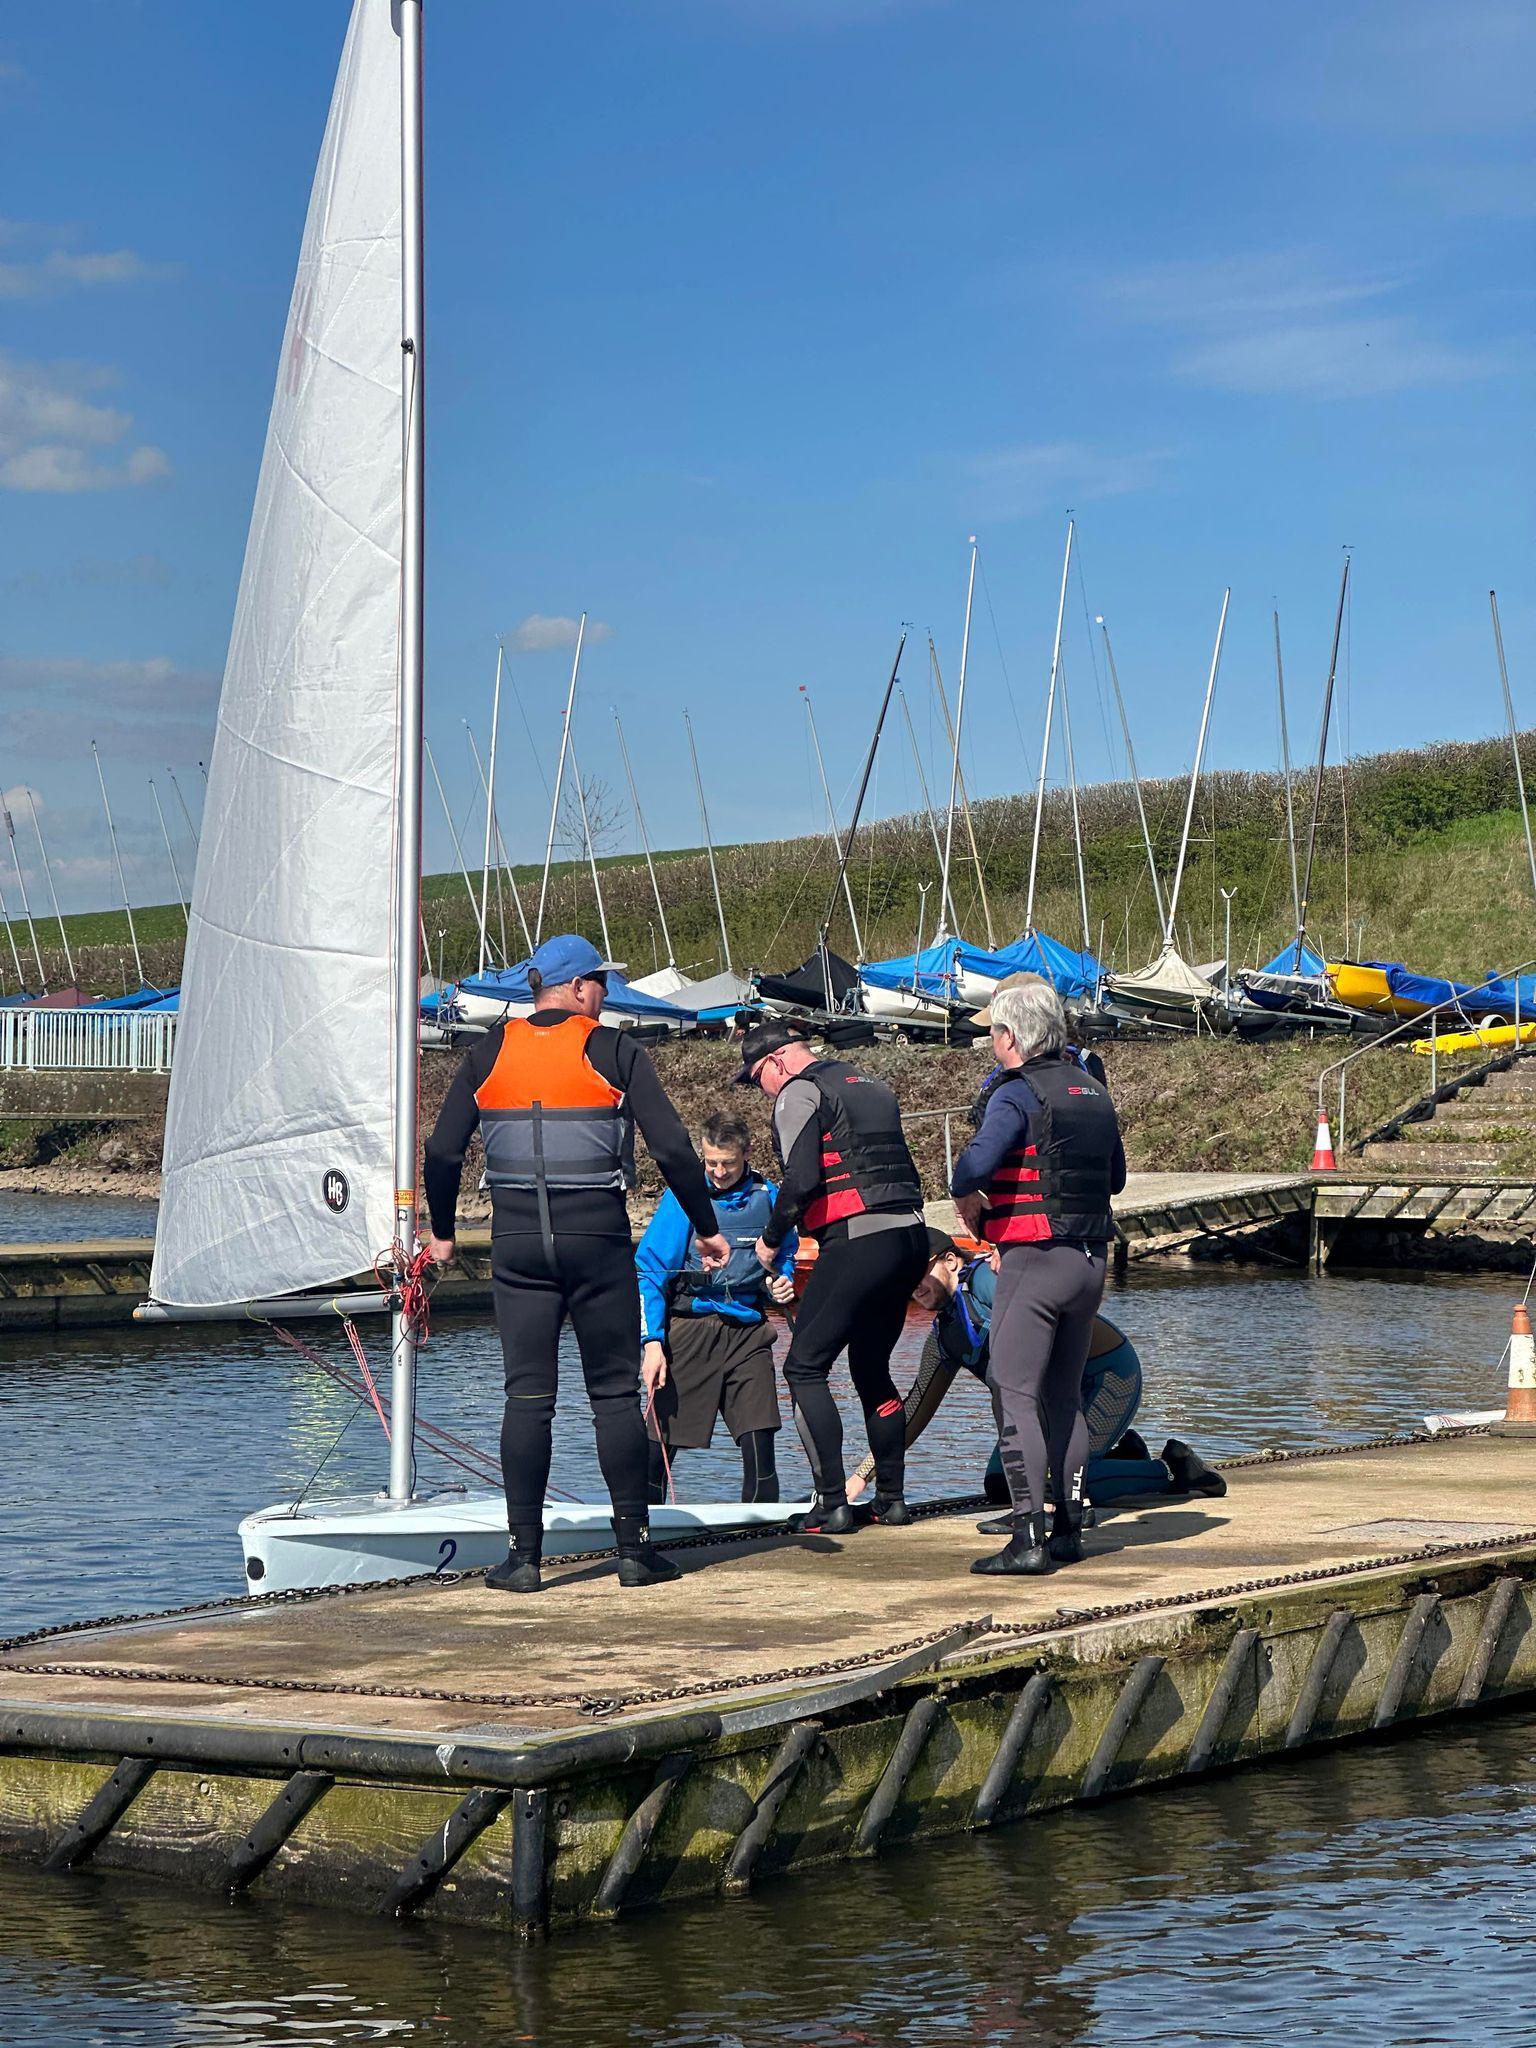 First time sailors coming to a Taster session